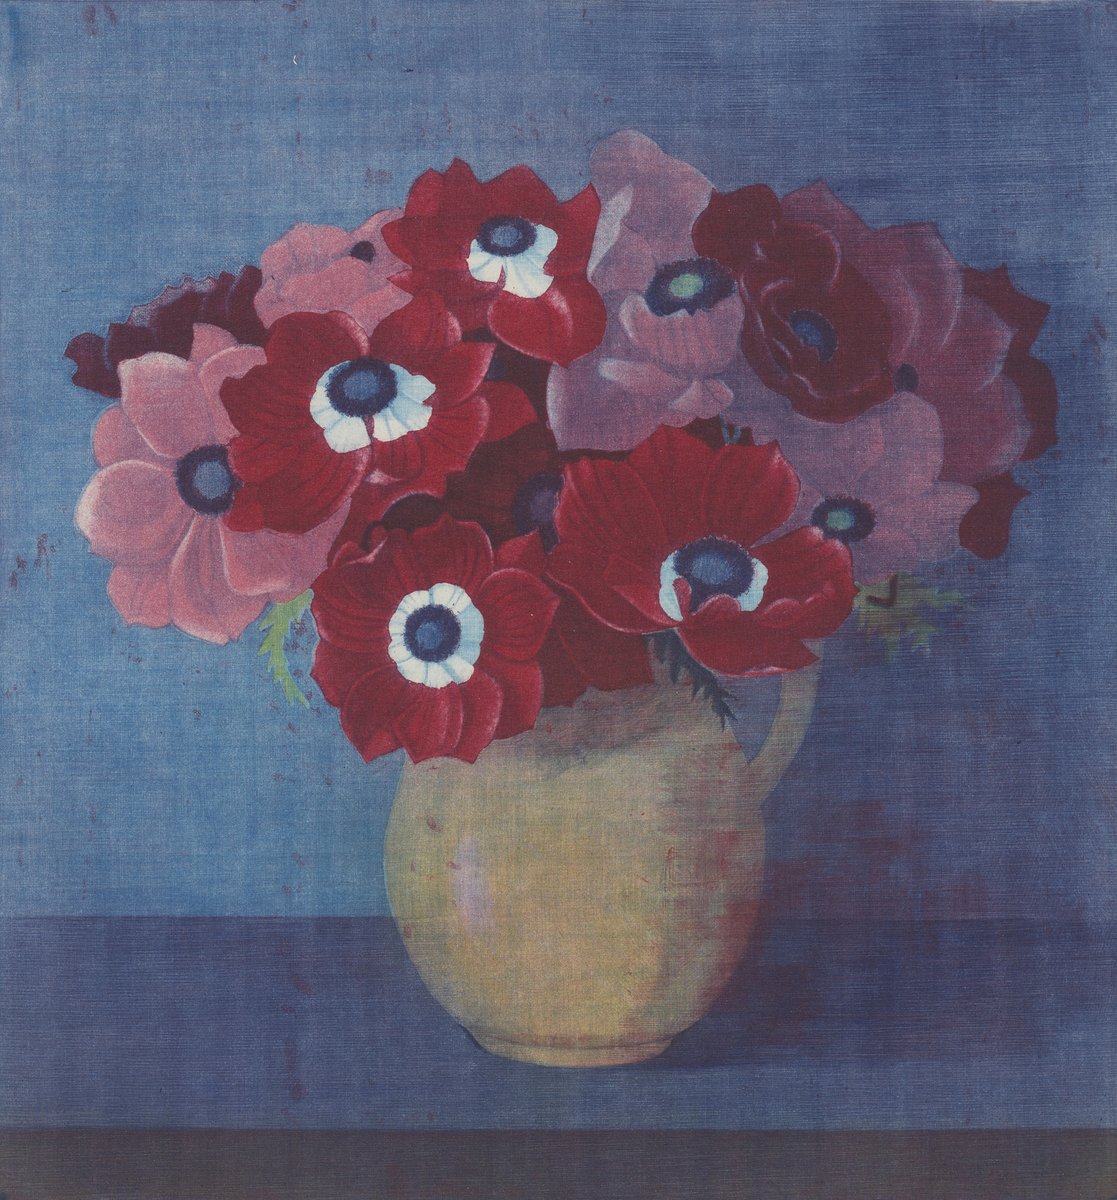 💐 Giving all the moms, maternal figures, and caretakers their flowers on this special day. — Itō Wako (Japanese, born 1945), “Anemones in a Pitcher,” 1976. Color mezzotint on paper; 12 7/16 × 11 9/16 in. The Carol and Seymour Haber Collection, 1997.56.1